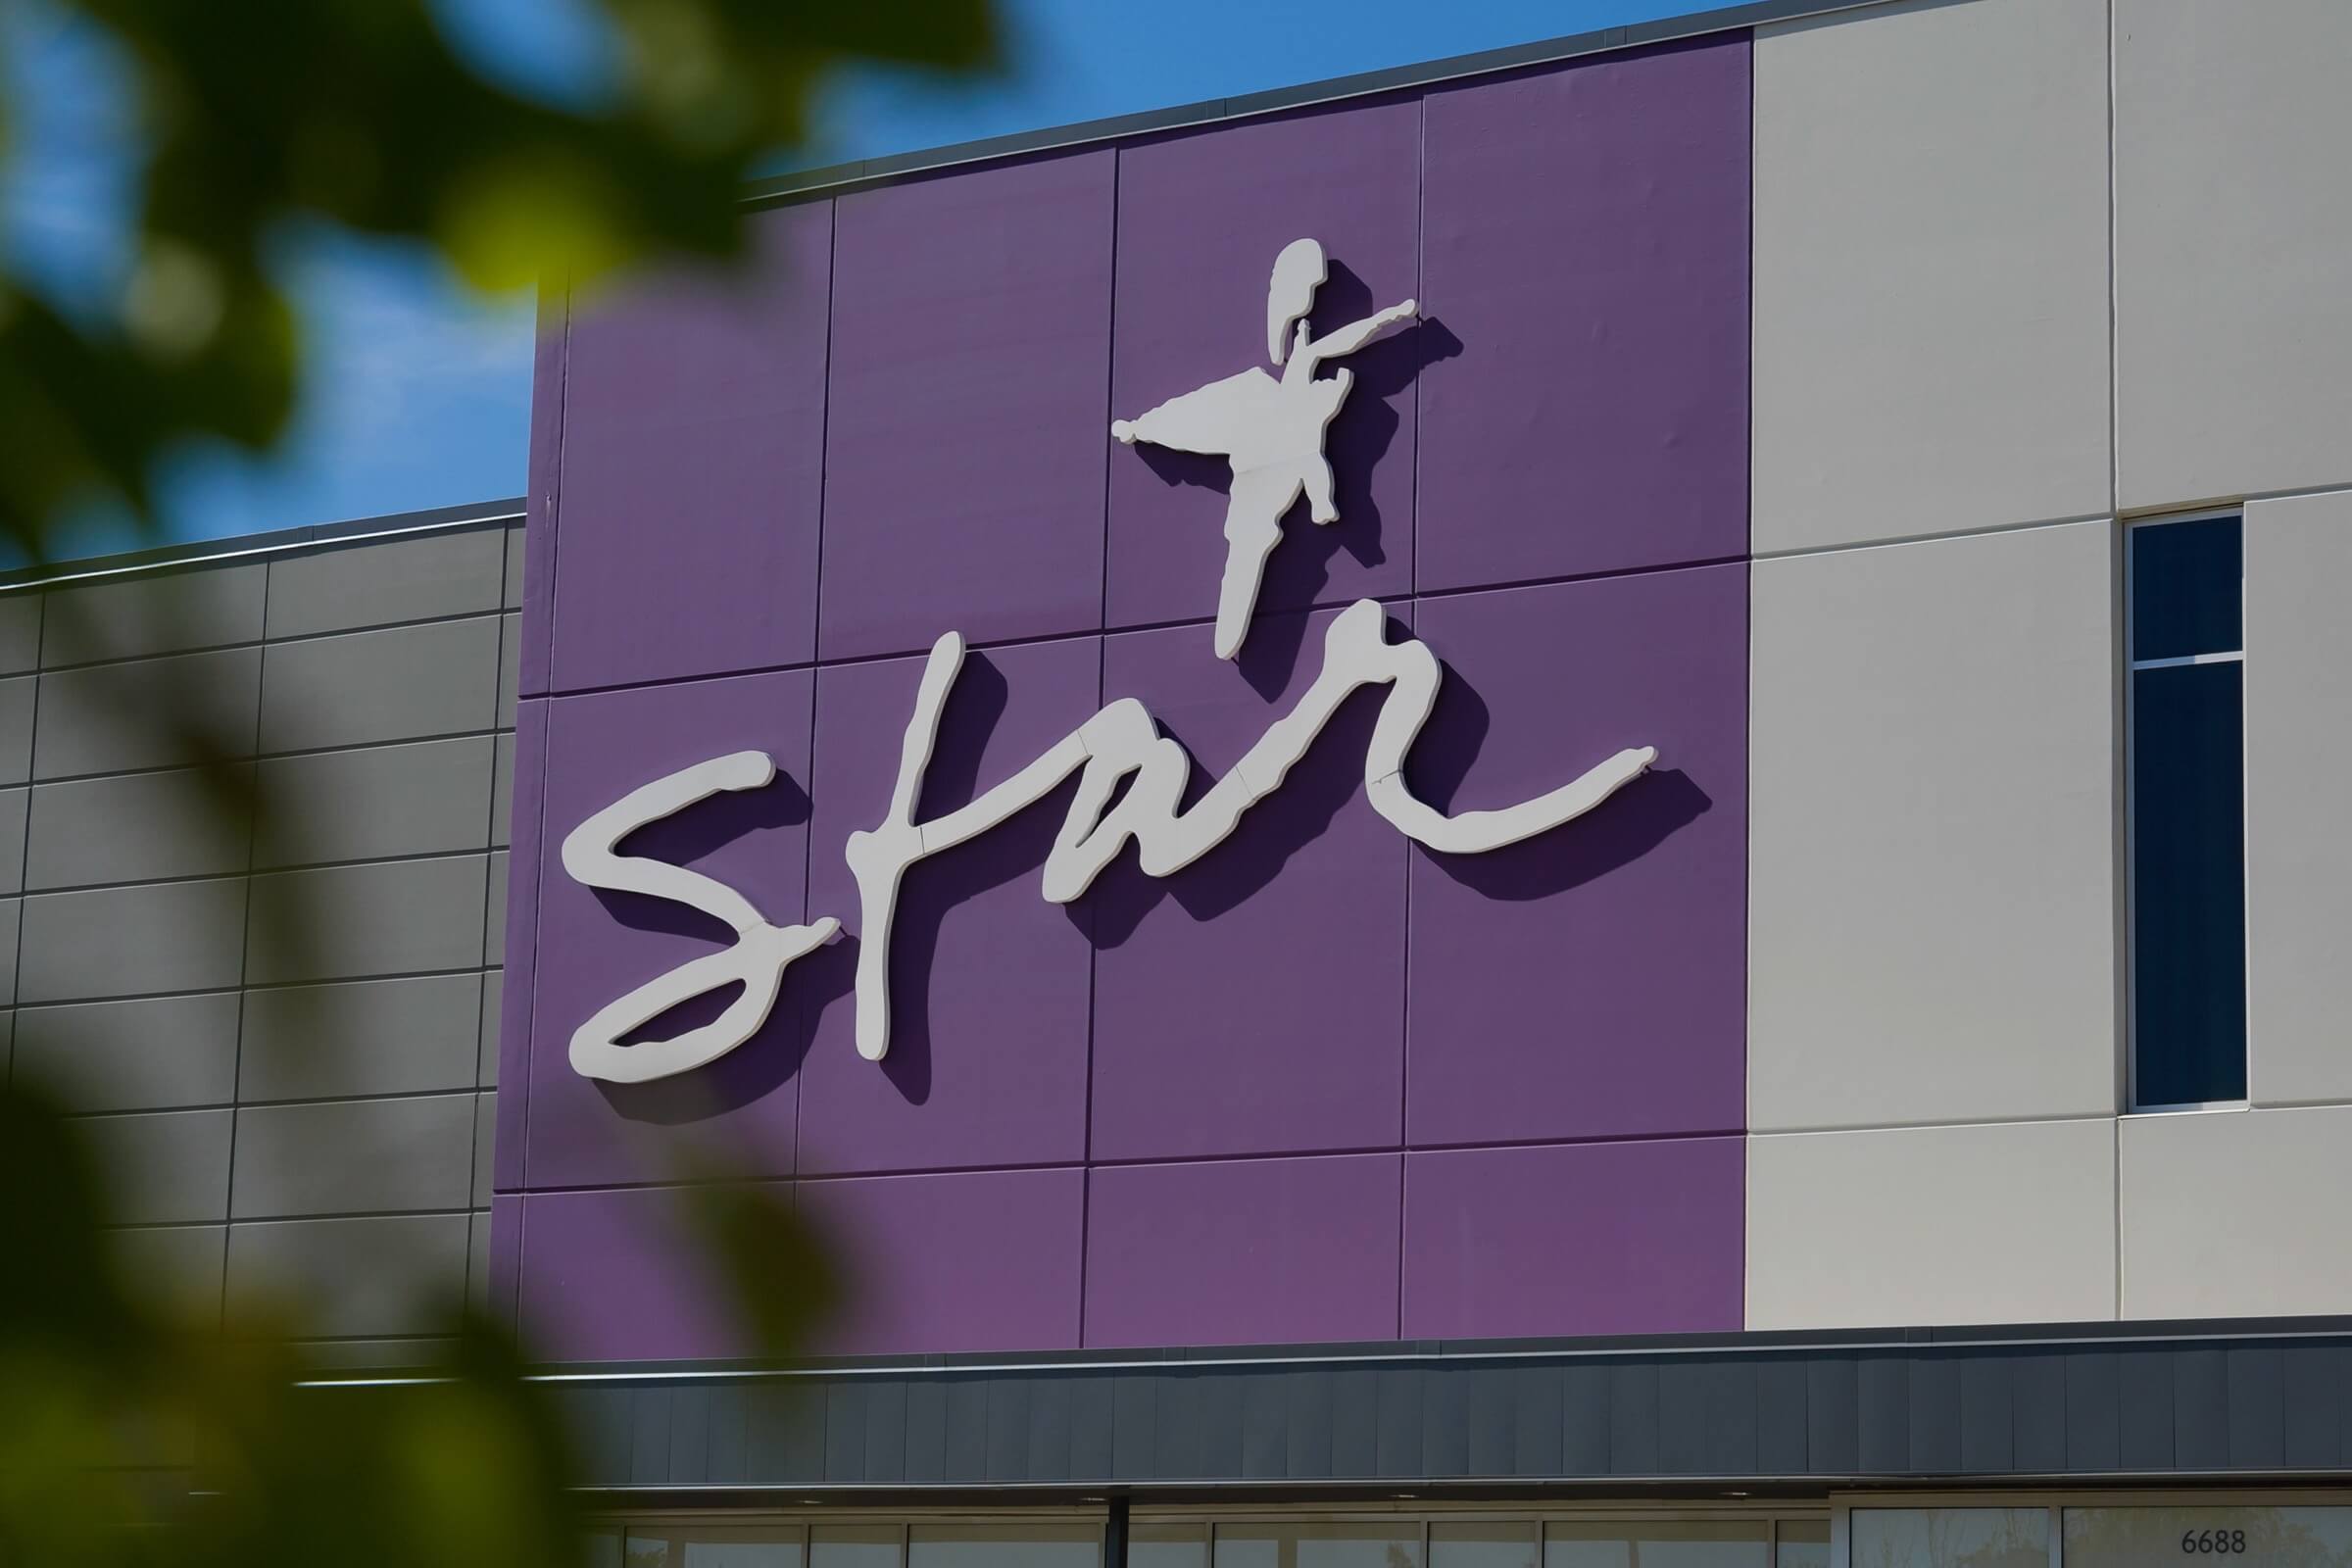 STAR logo on the building exterior